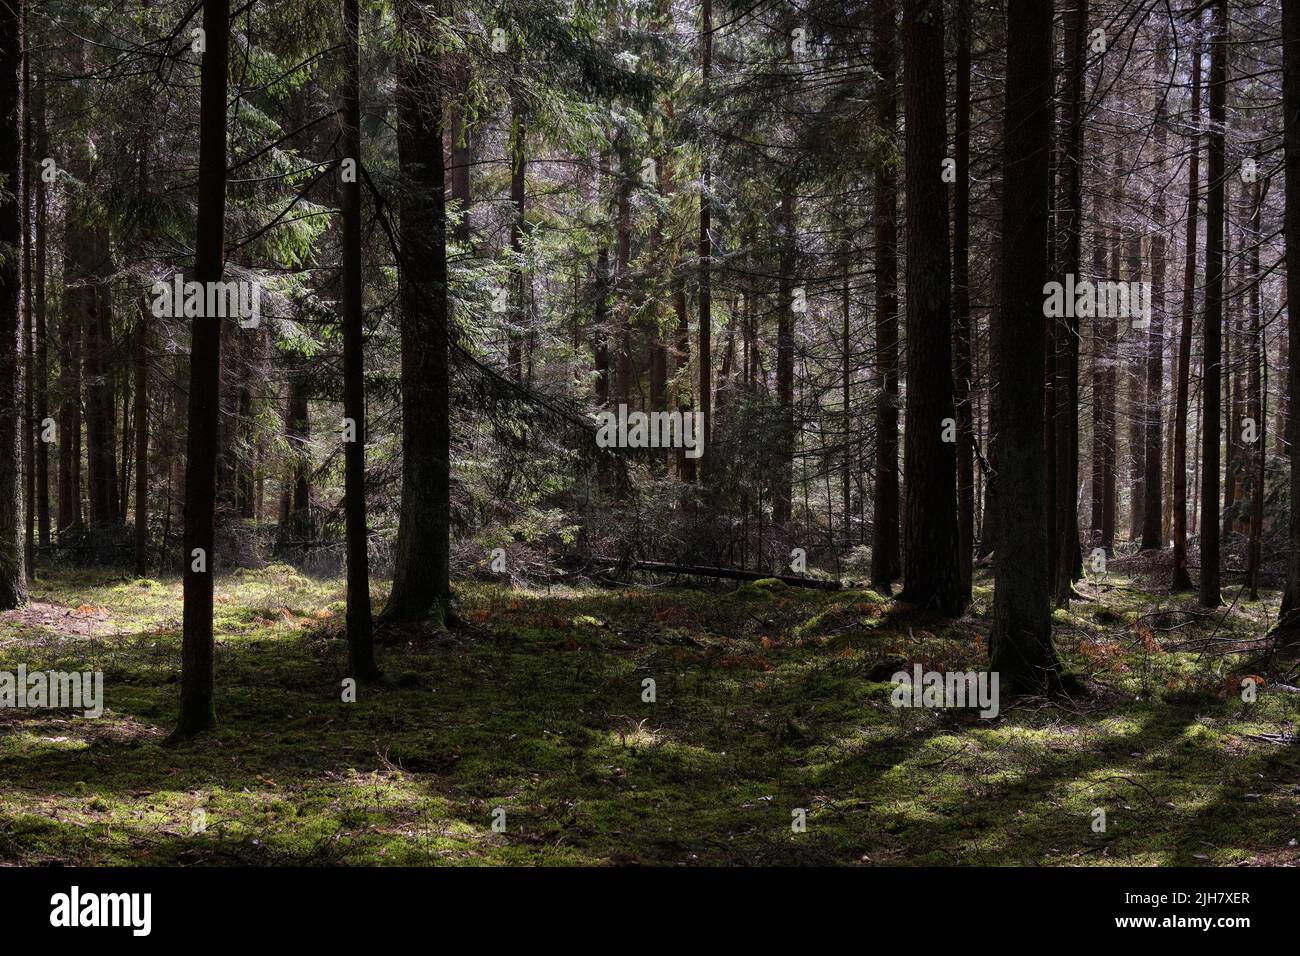 Springtime coniferous forest tree stand in sun with pines and spruces, Bialowieza Forest, Poland, Europe Stock Photo